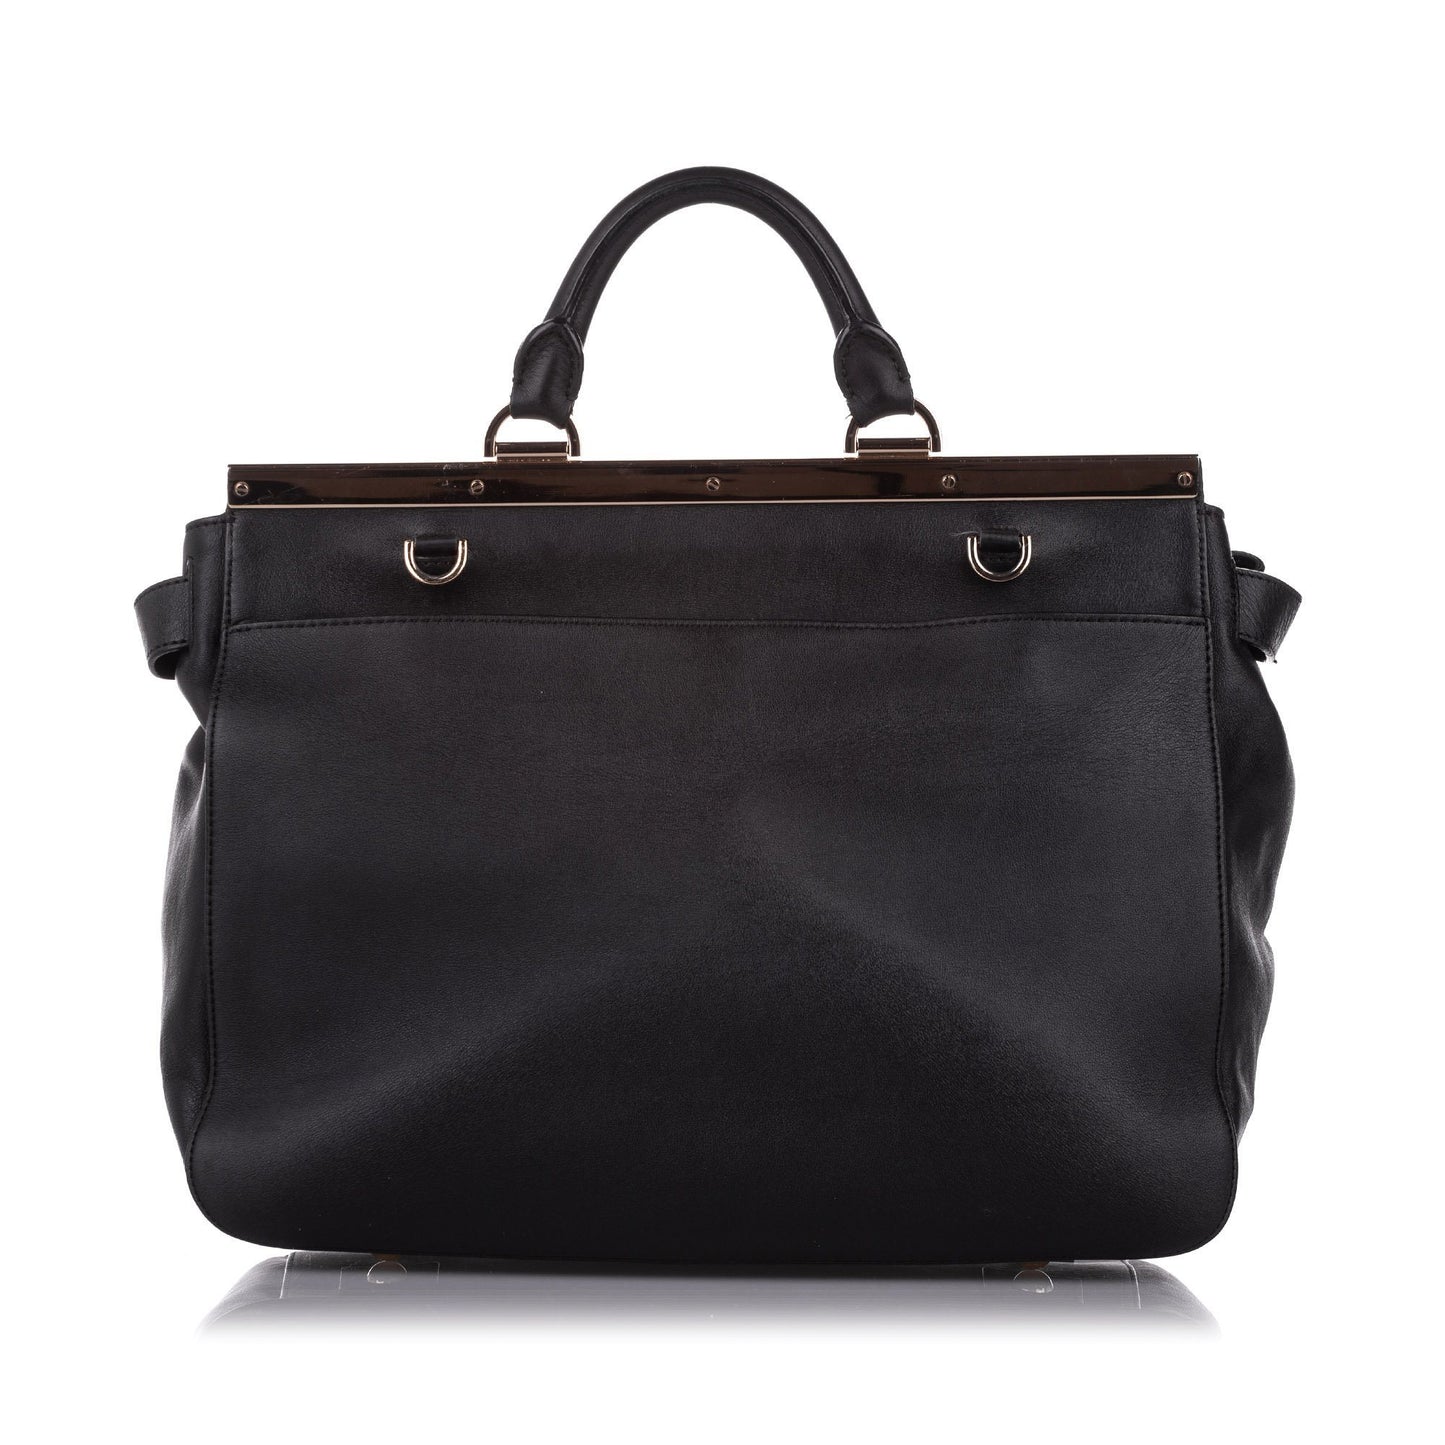 Mulberry Large Black Suffolk Leather Satchel Bags Mulberry 